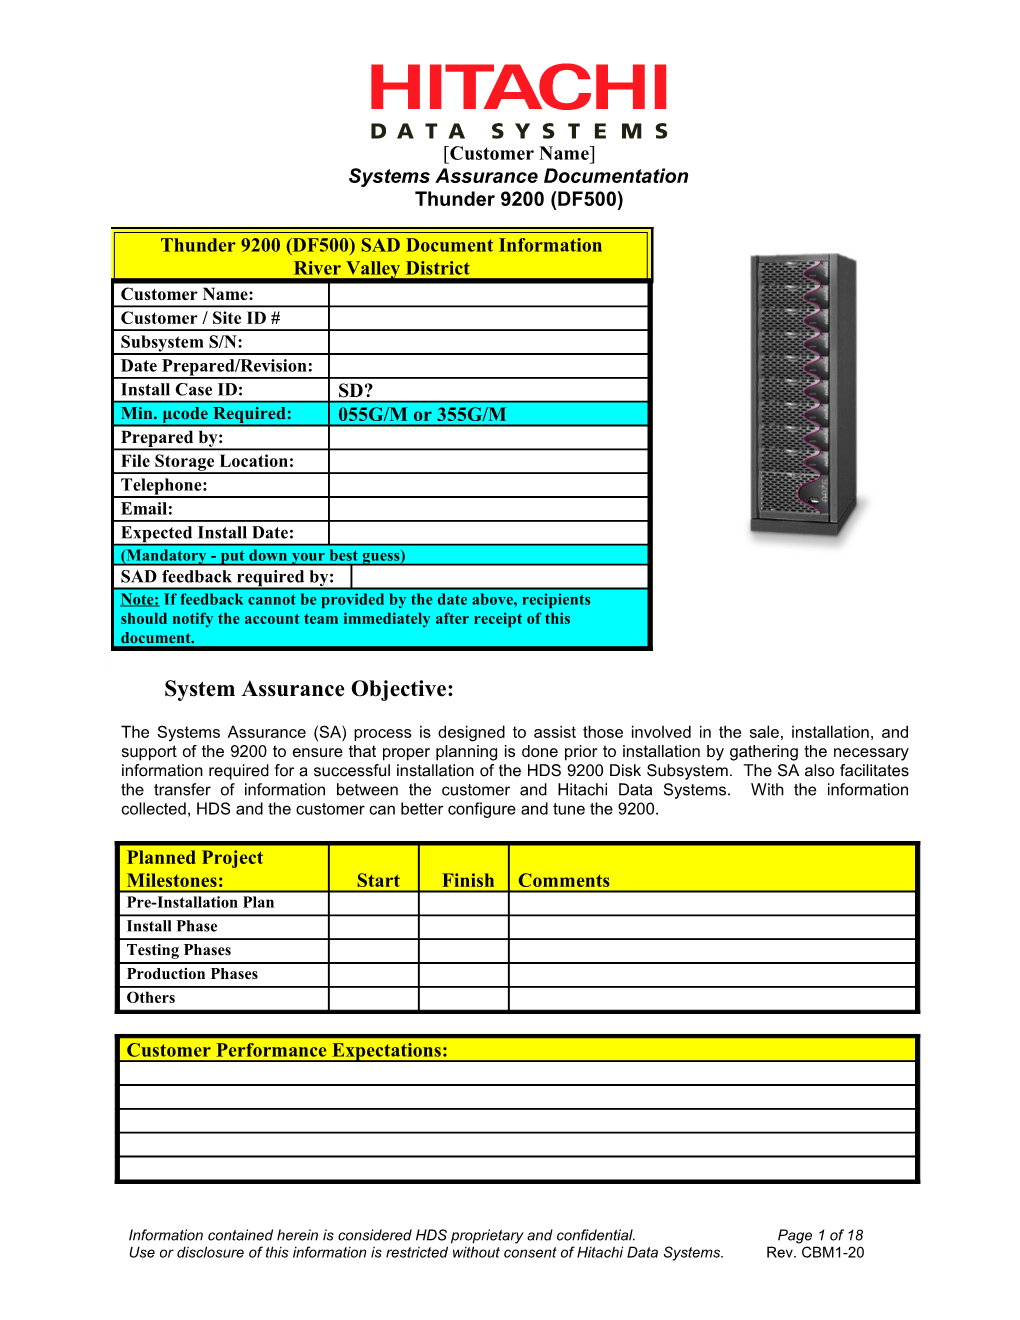 SSD Thunder 9200 - Systems Assurance Document